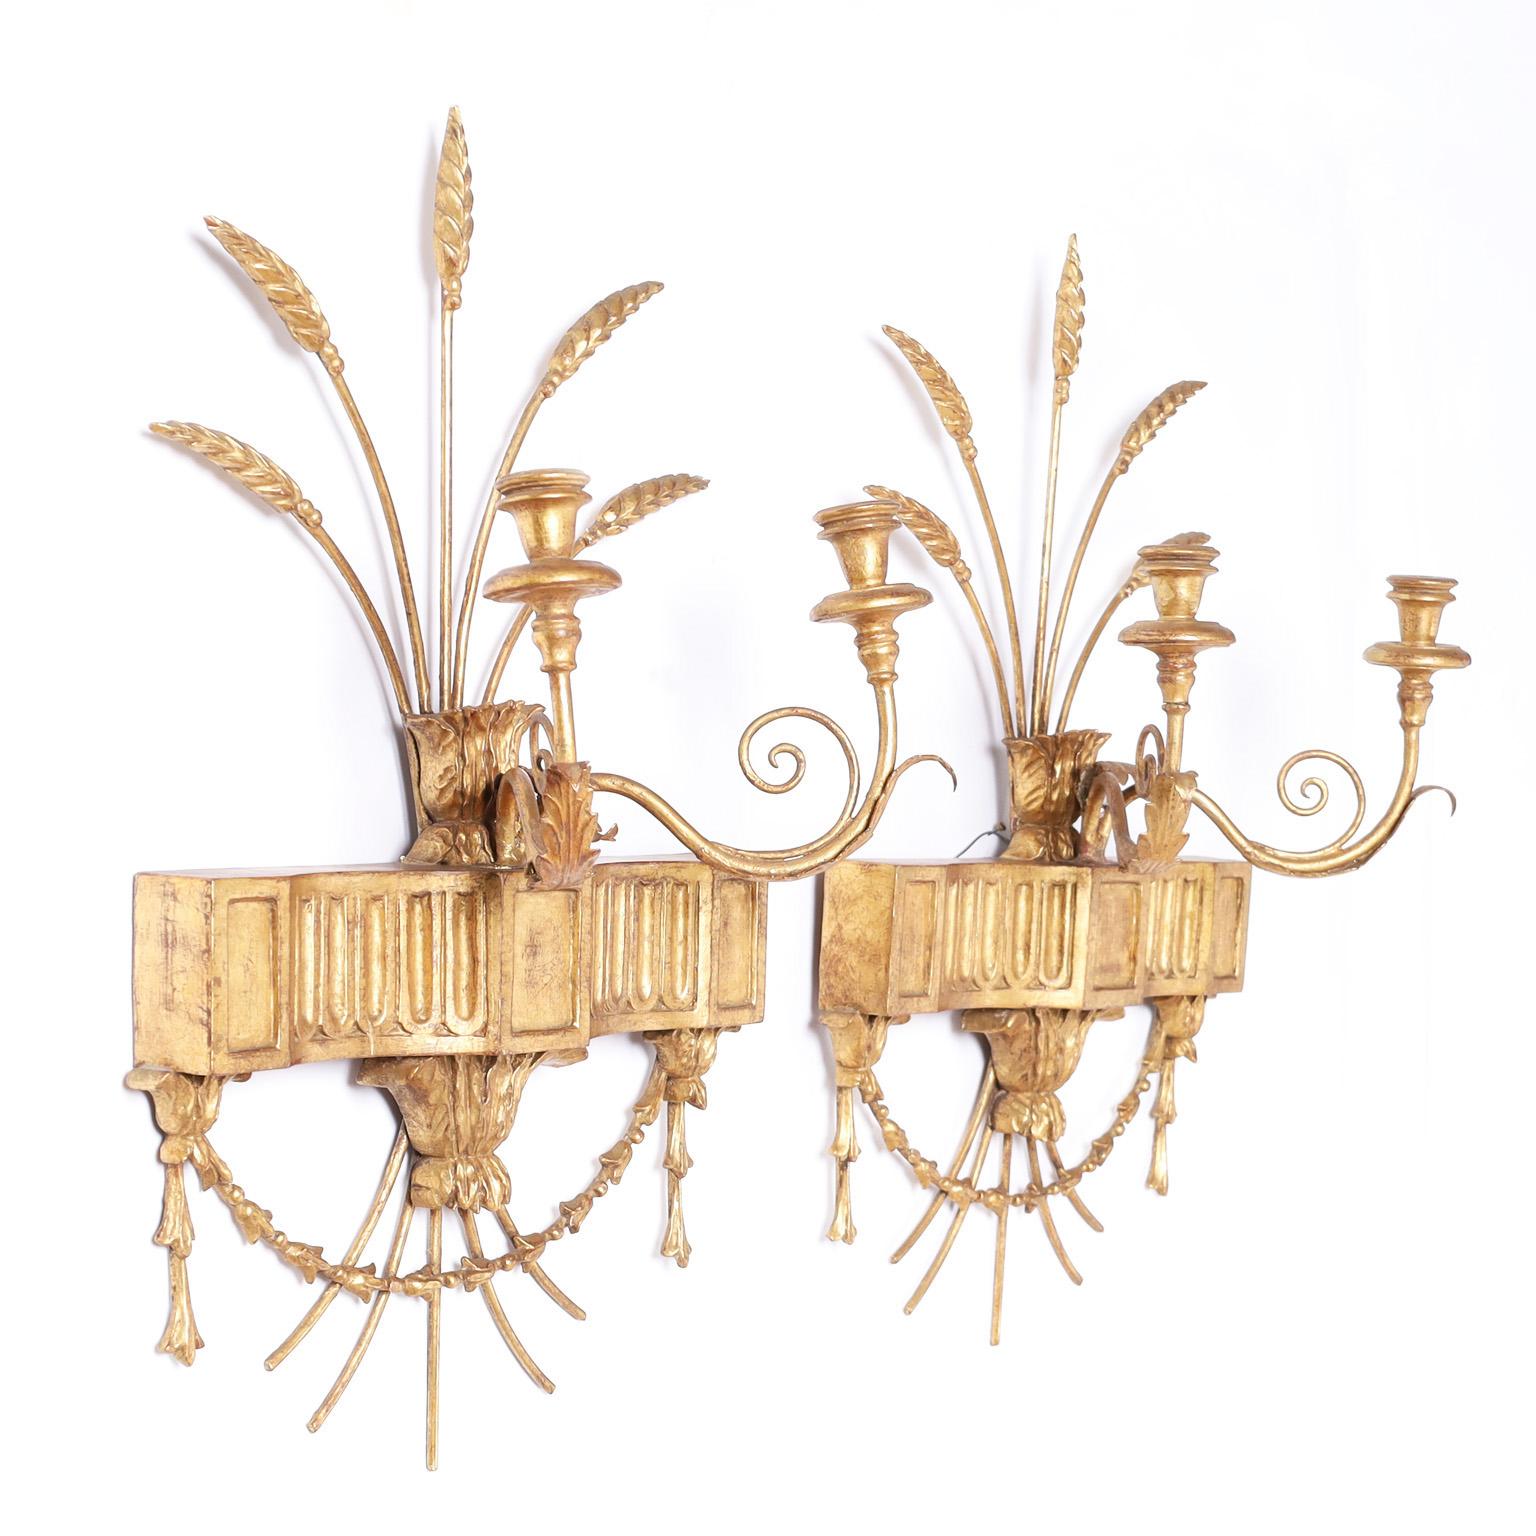 Antique pair of two light wall sconces crafted in metal and wood with a wheat stalk motif, retaining the original gilt finish now worn.